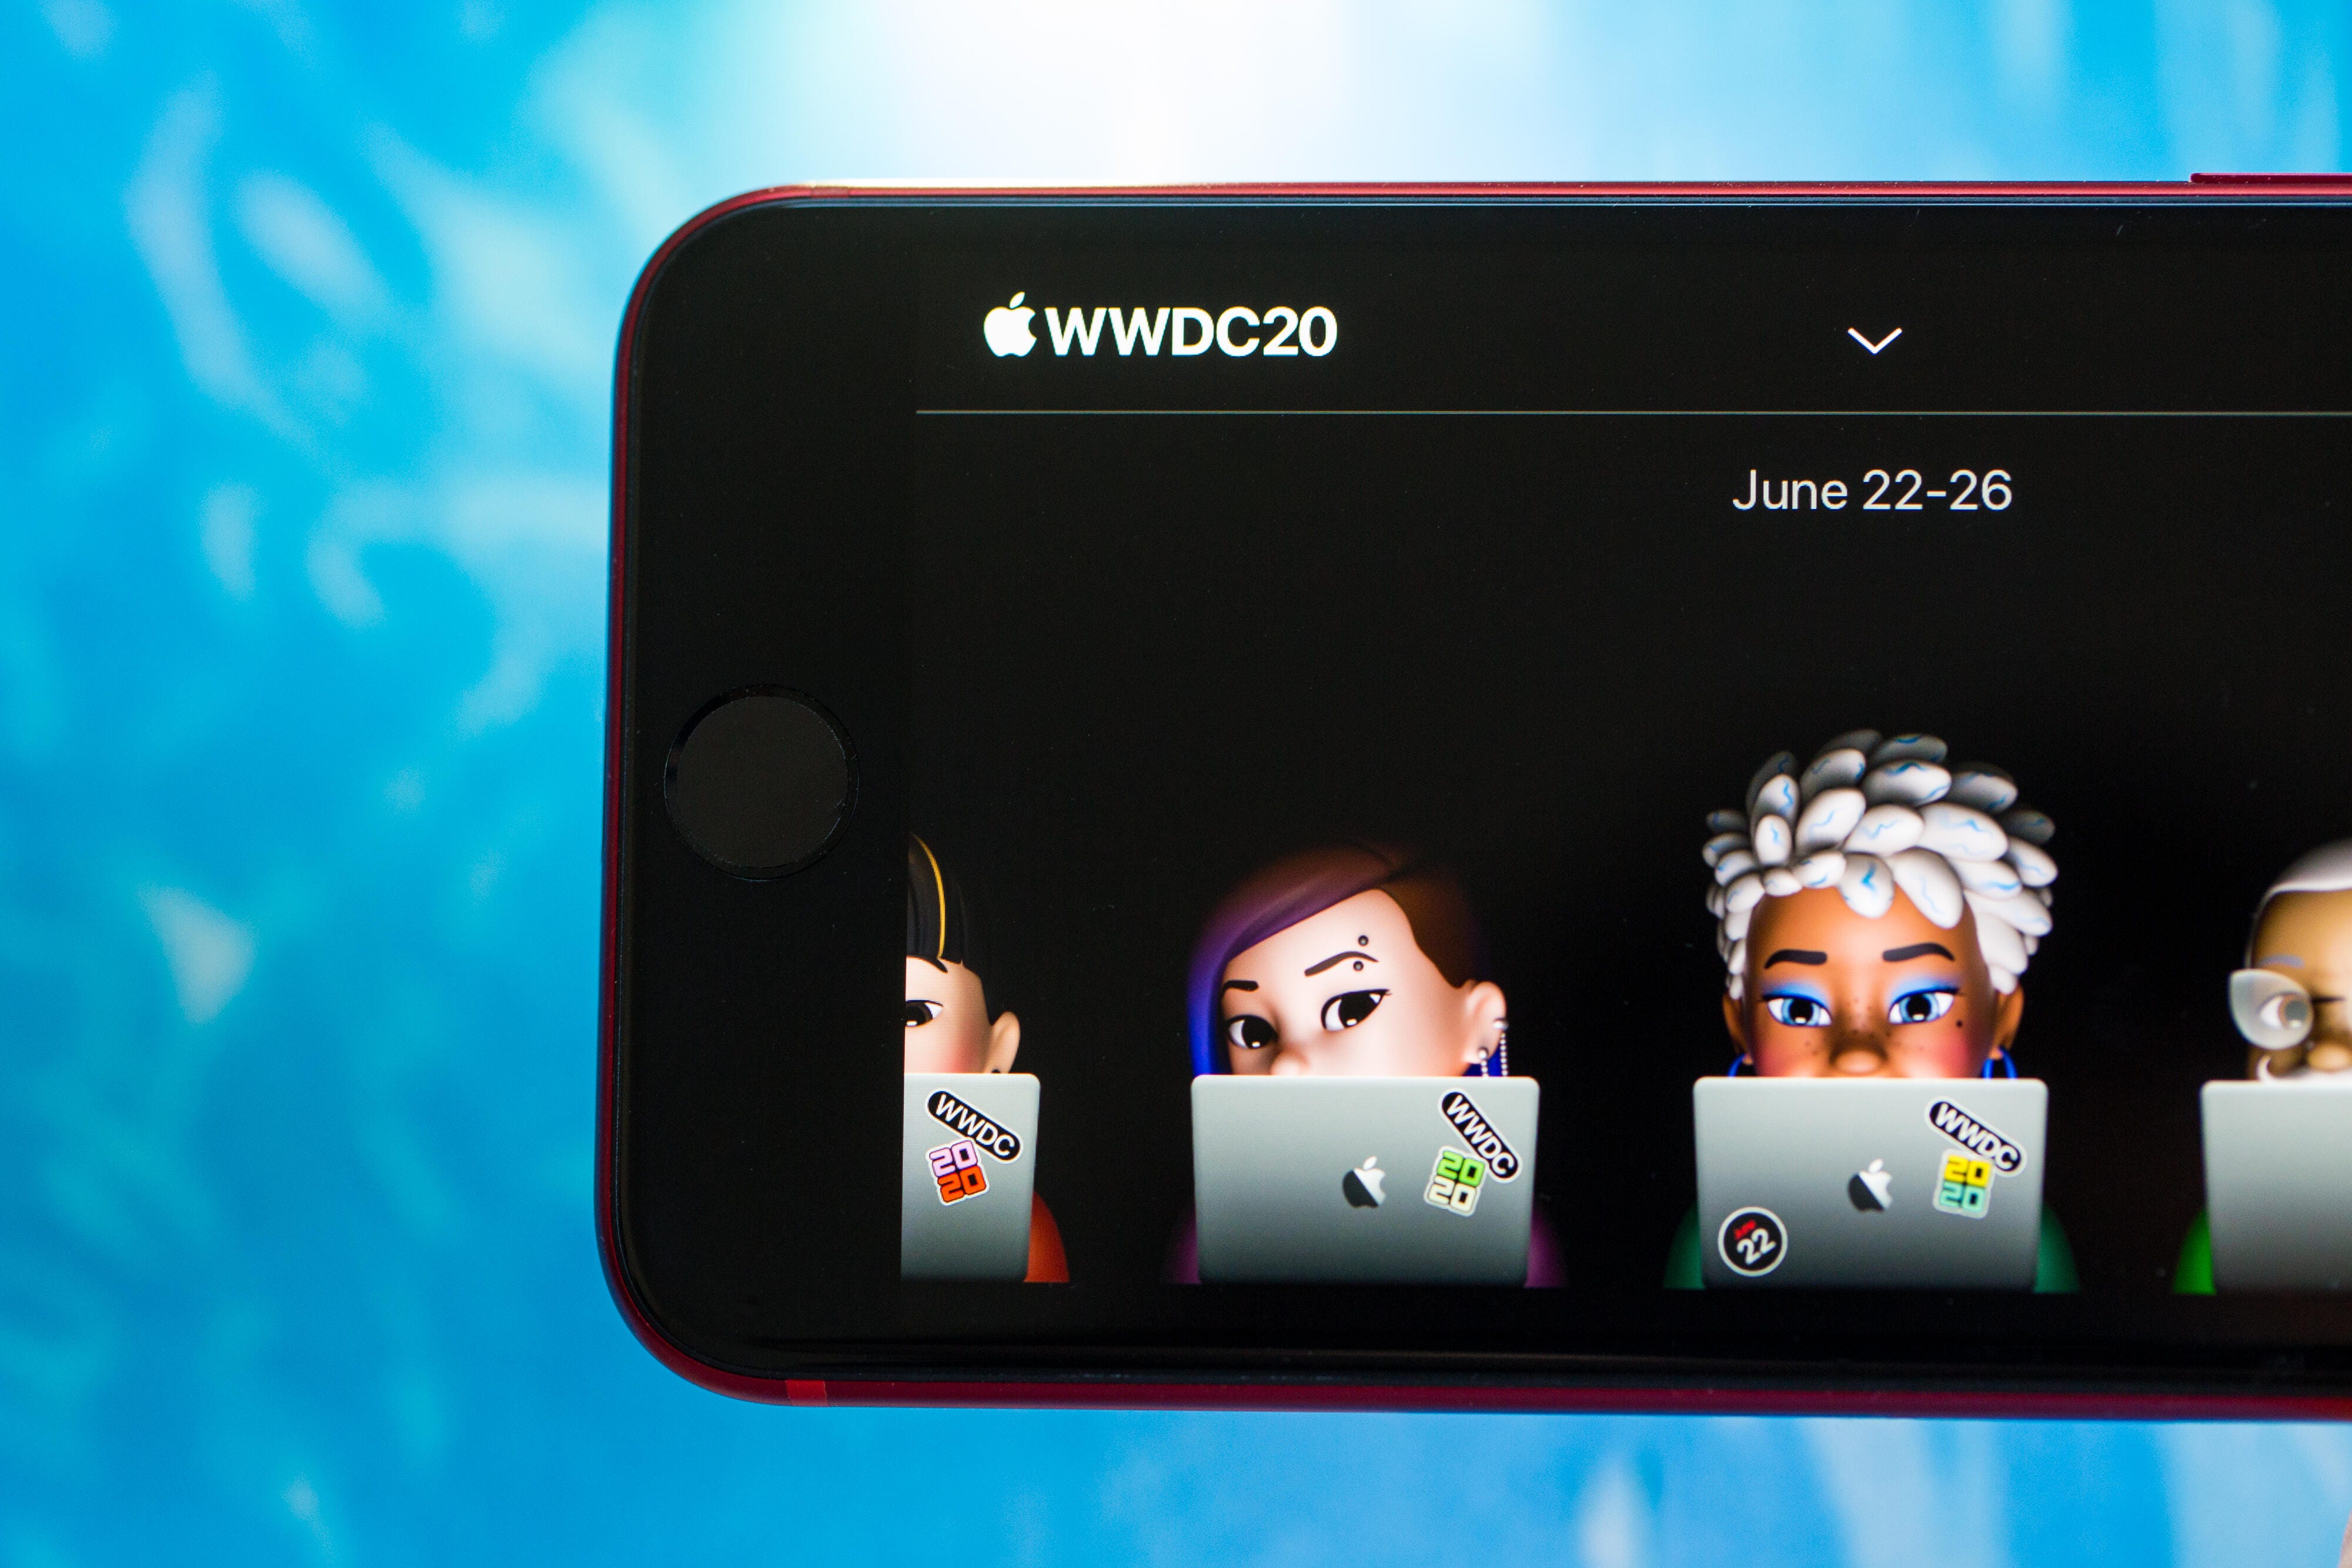 How to watch Apple’s WWDC ‘State of the Union’ address